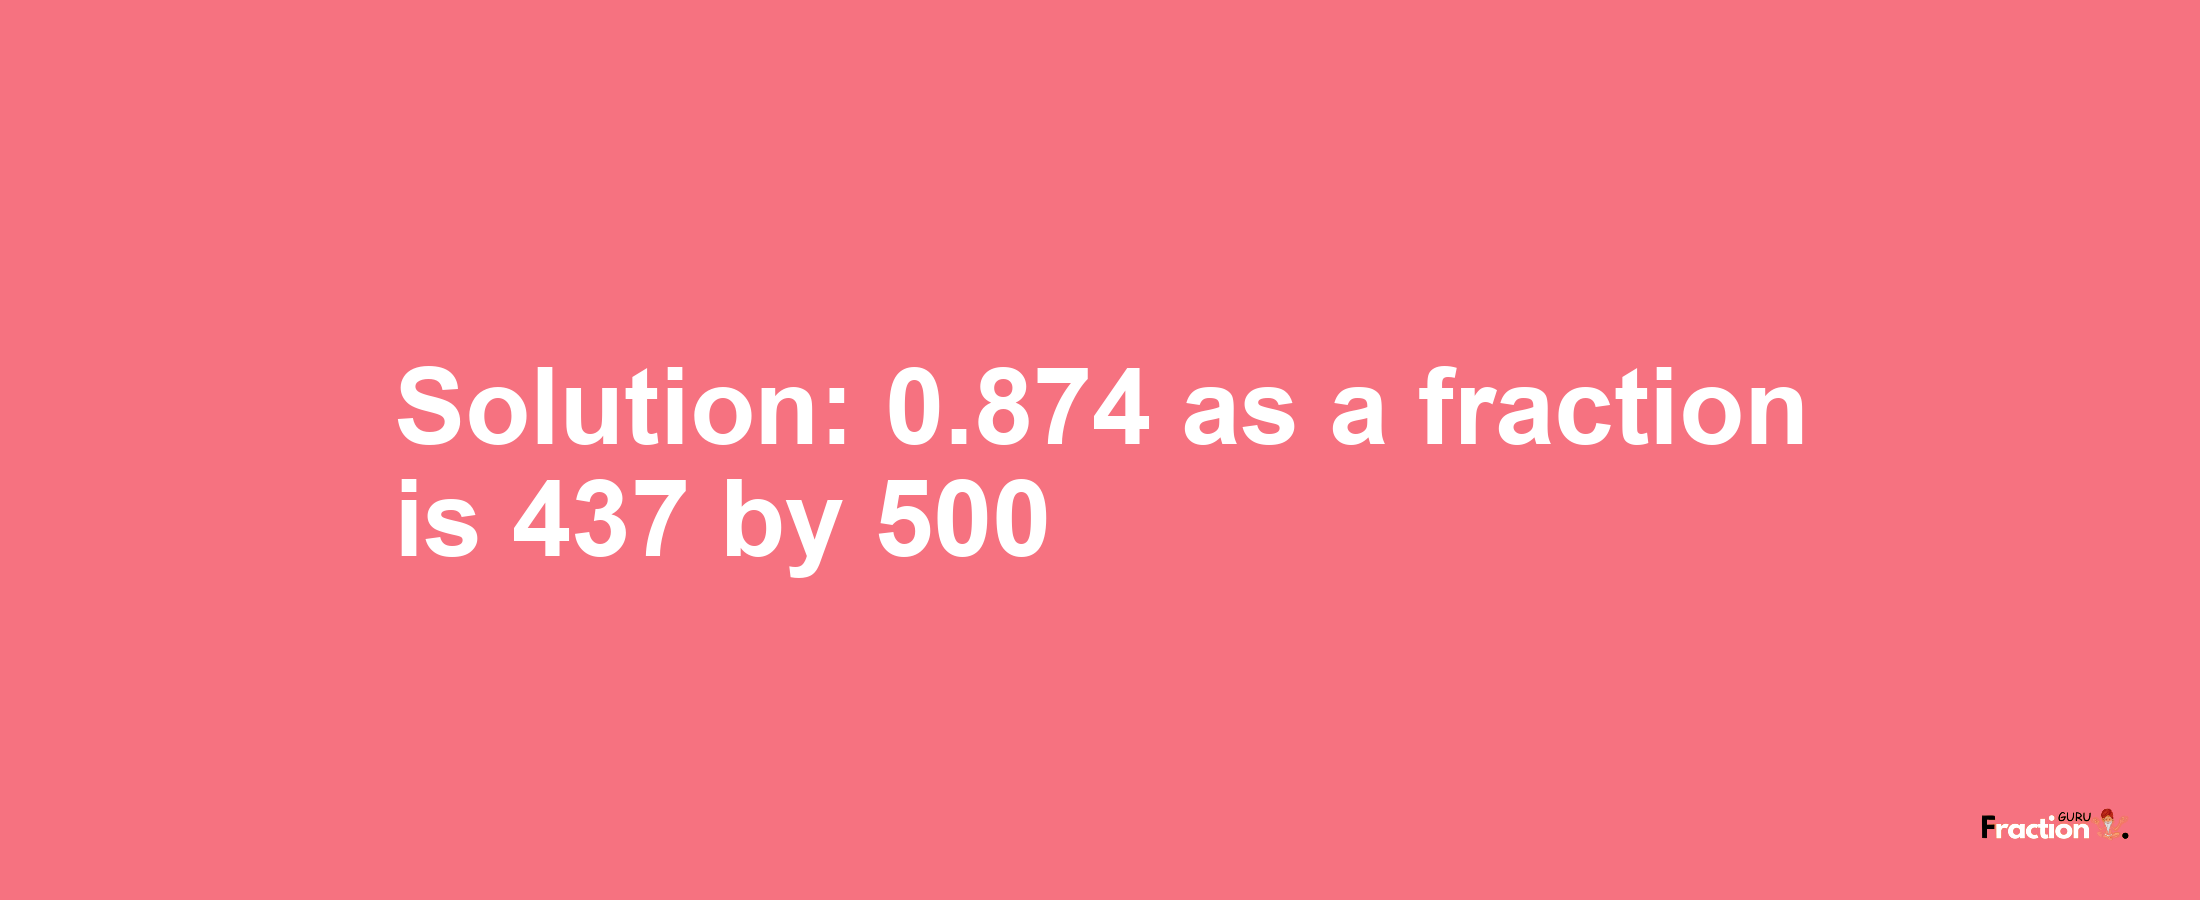 Solution:0.874 as a fraction is 437/500